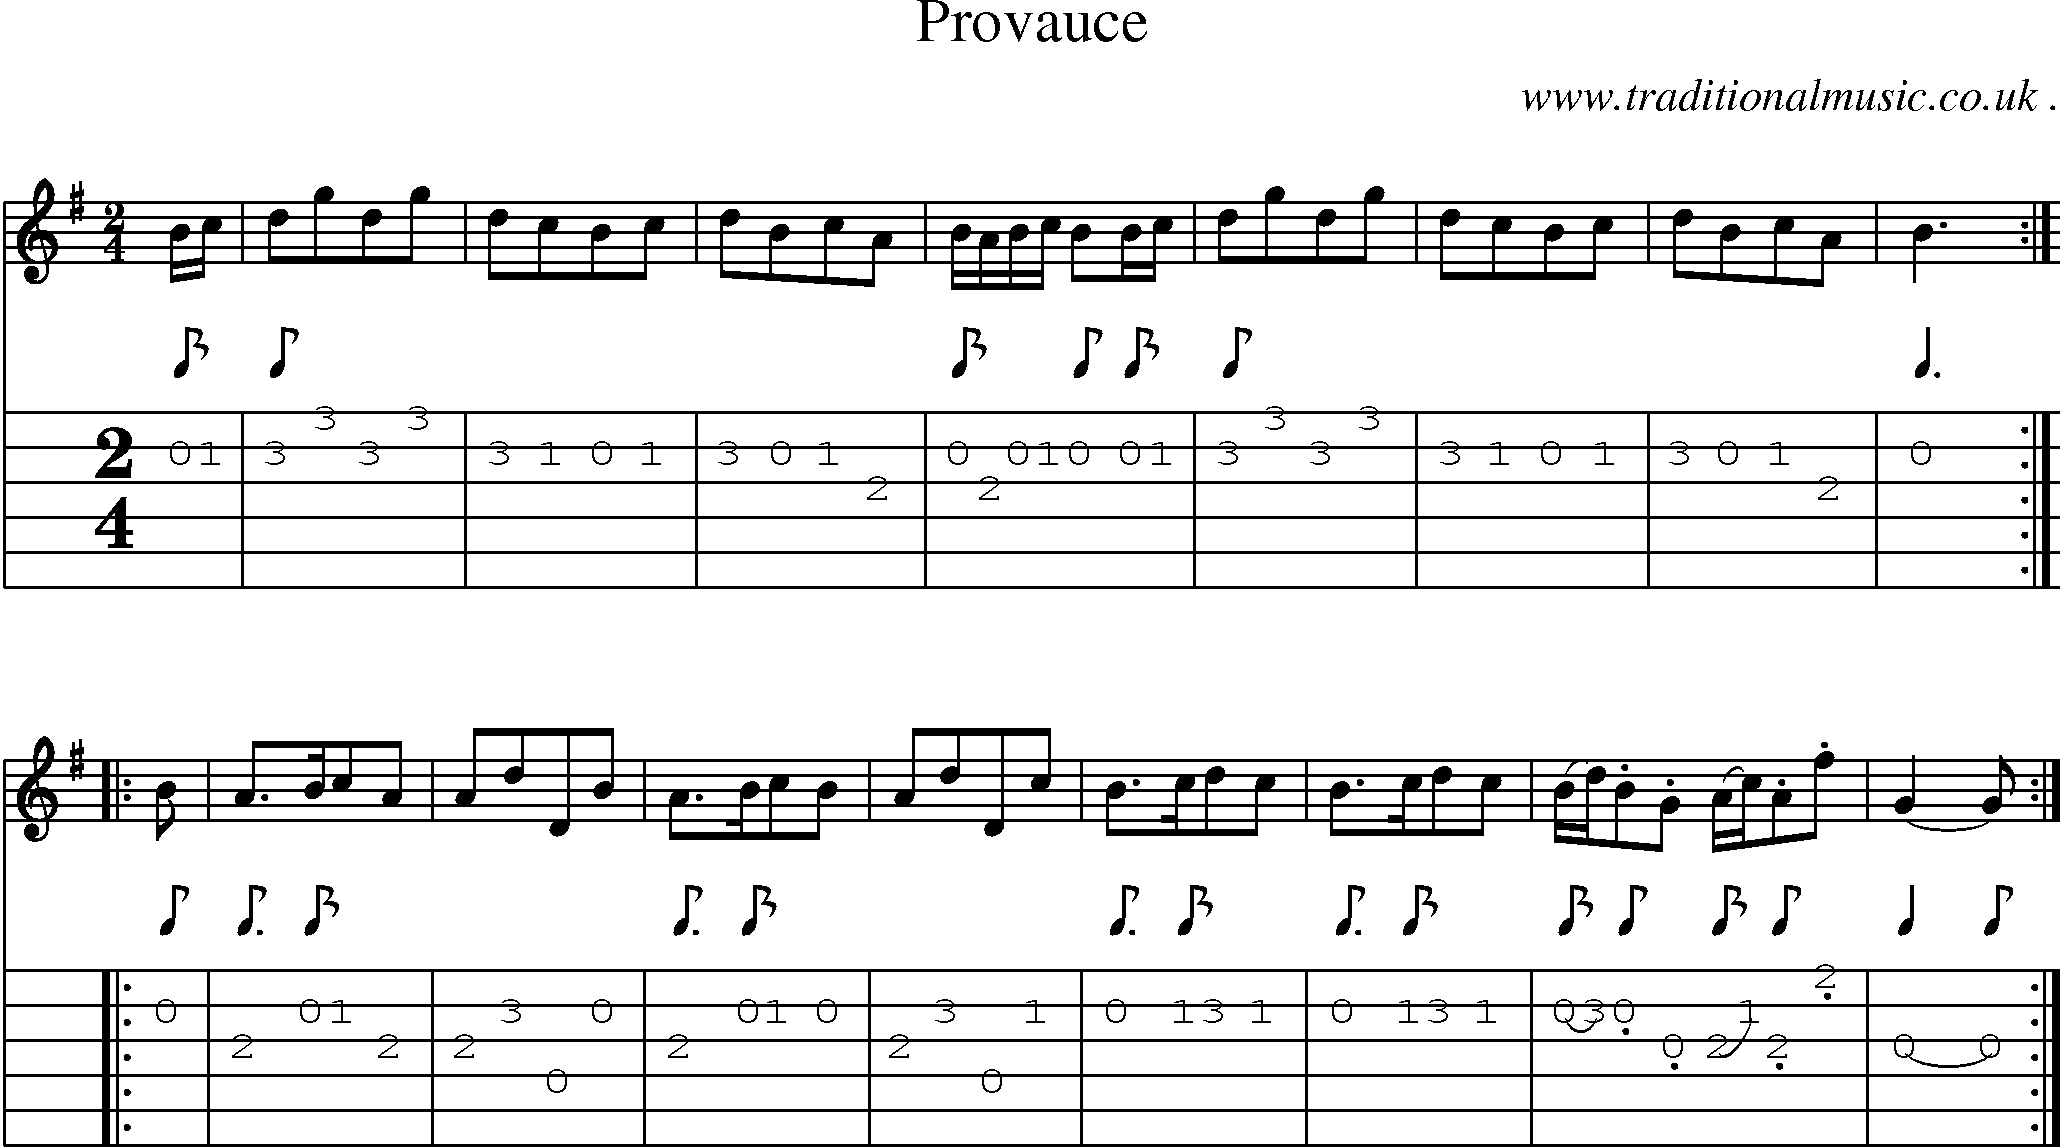 Sheet-Music and Guitar Tabs for Provauce